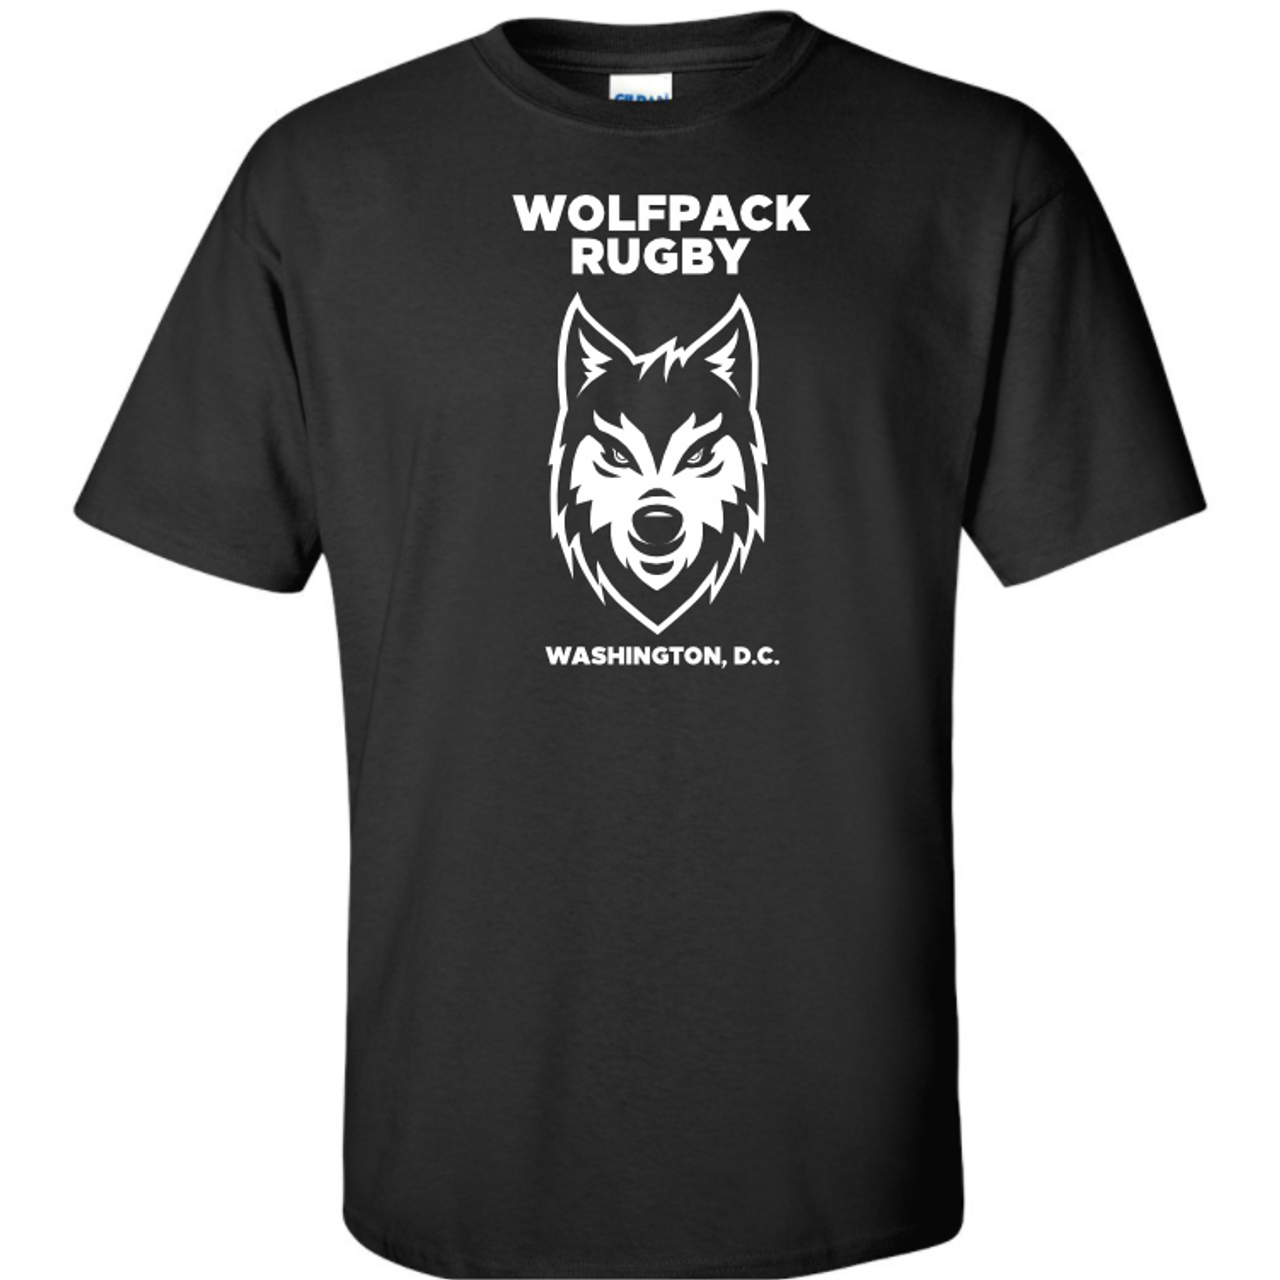 DC Wolfpack Rugby Cotton T-Shirt, Black